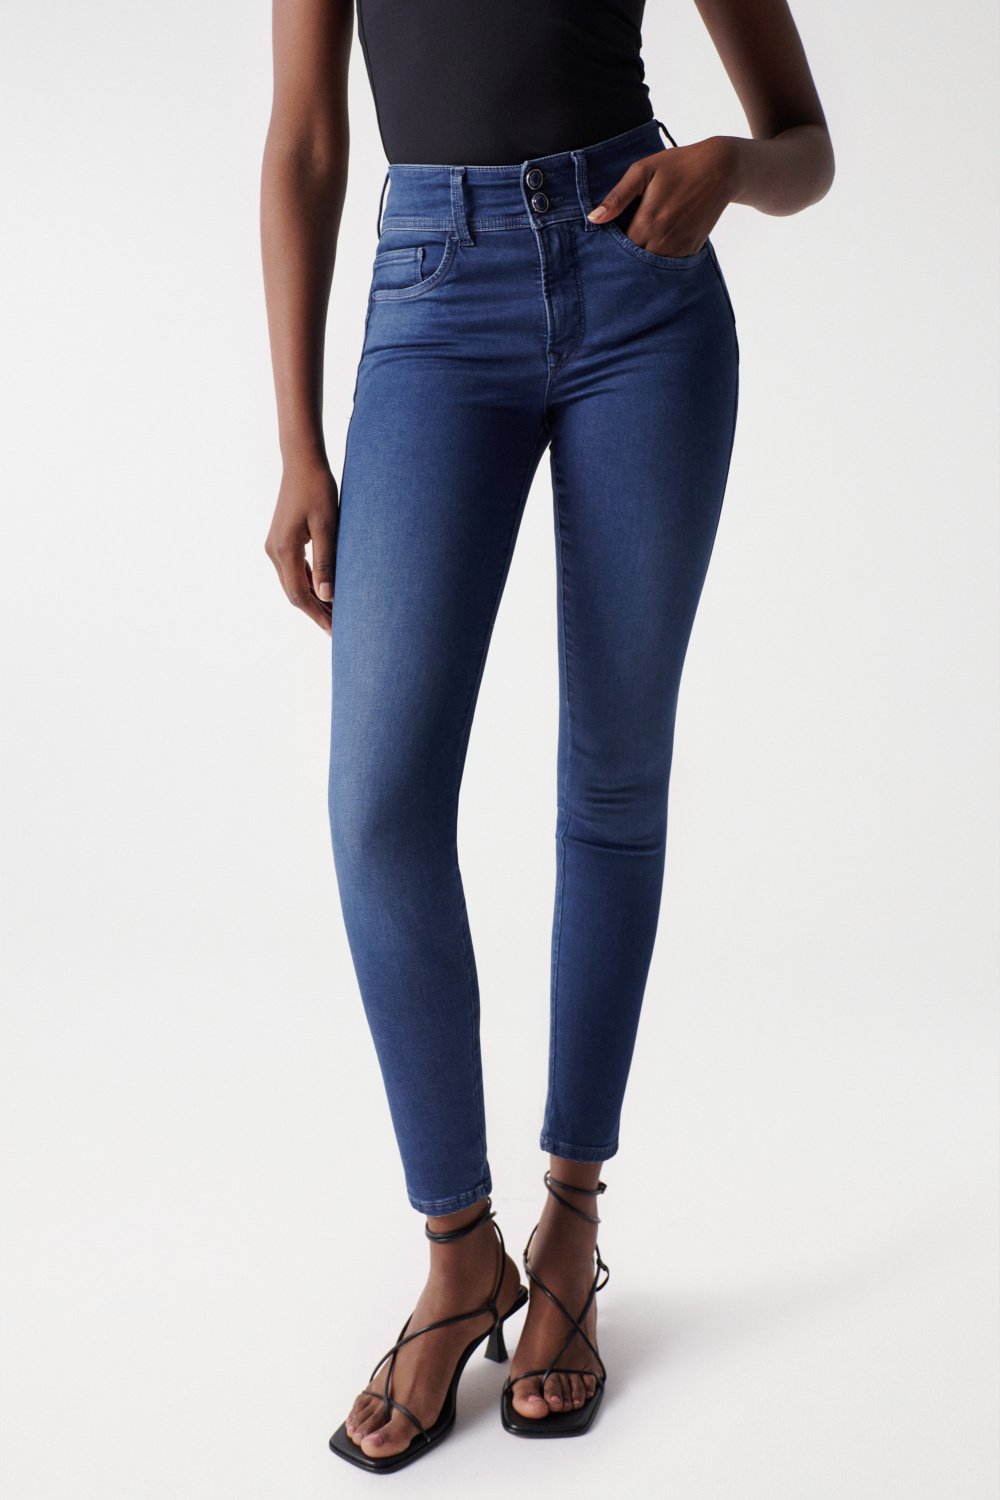 SECRET PUSH IN-JEANS, SOFT TOUCH, SKINNY - Salsa